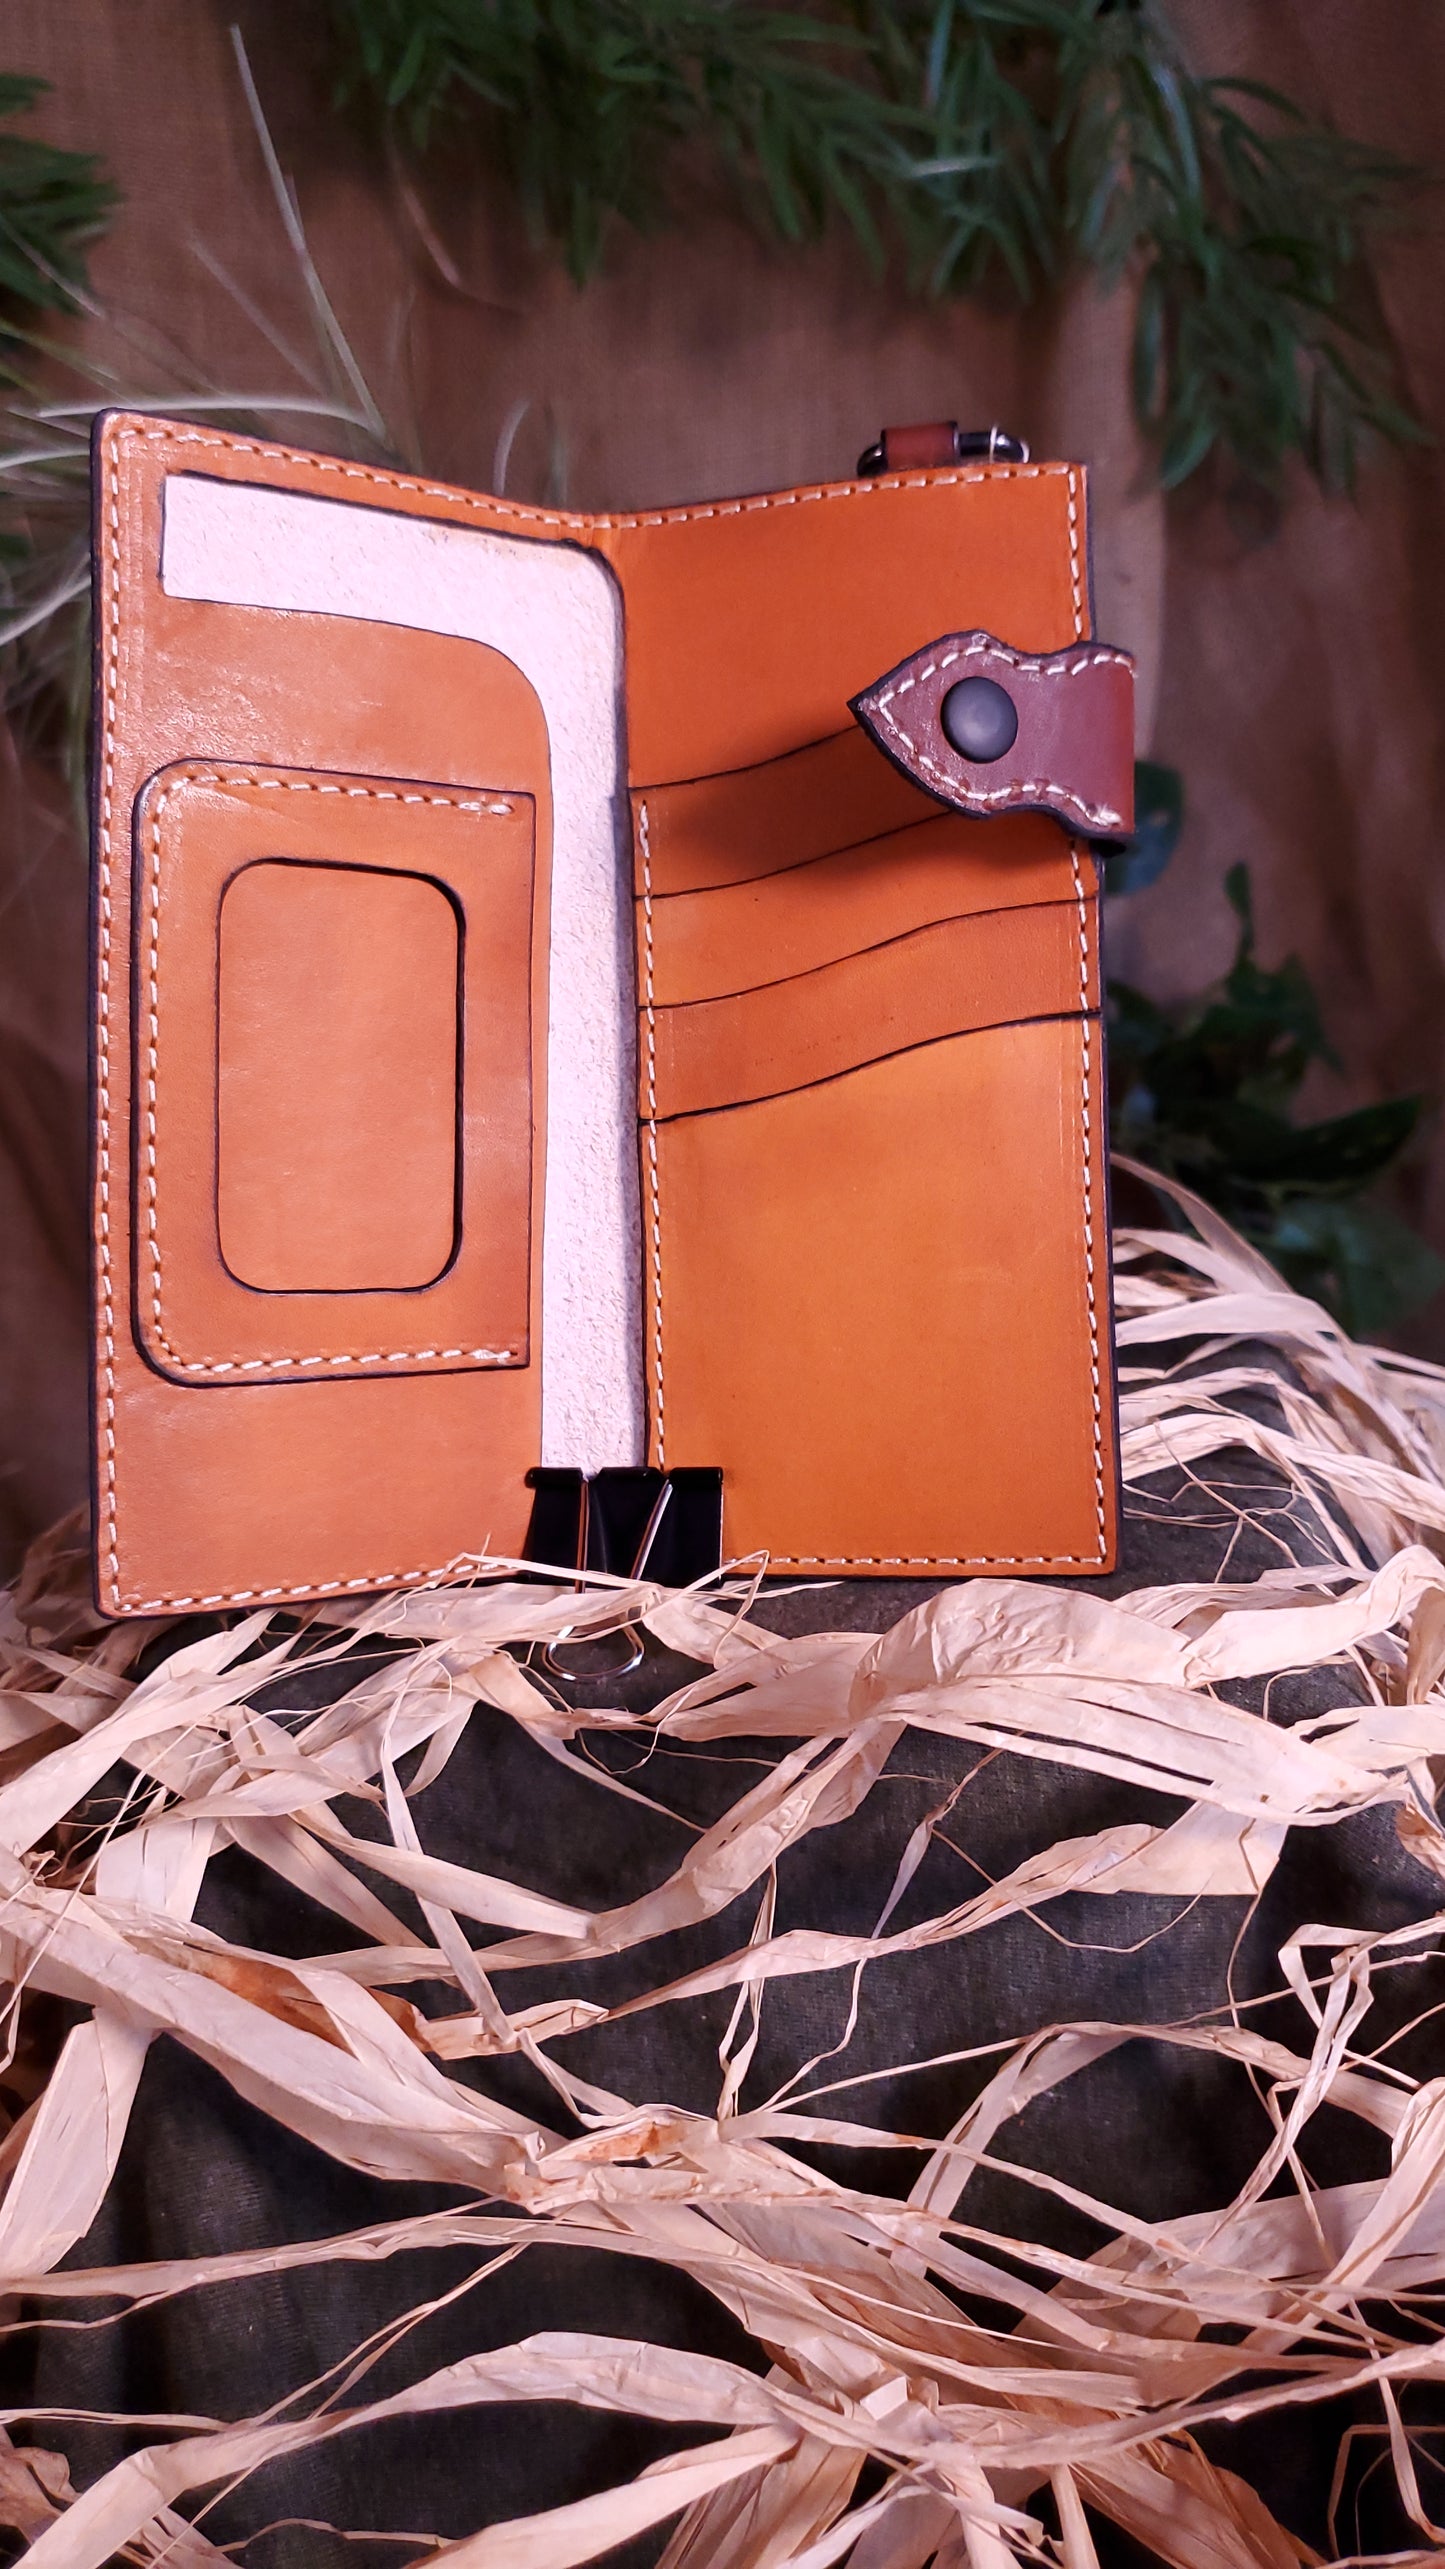 Interior of the Biker Wallet, featuring an ID pocket with window and a cash slot on the left side, and 4 card slots on the right side